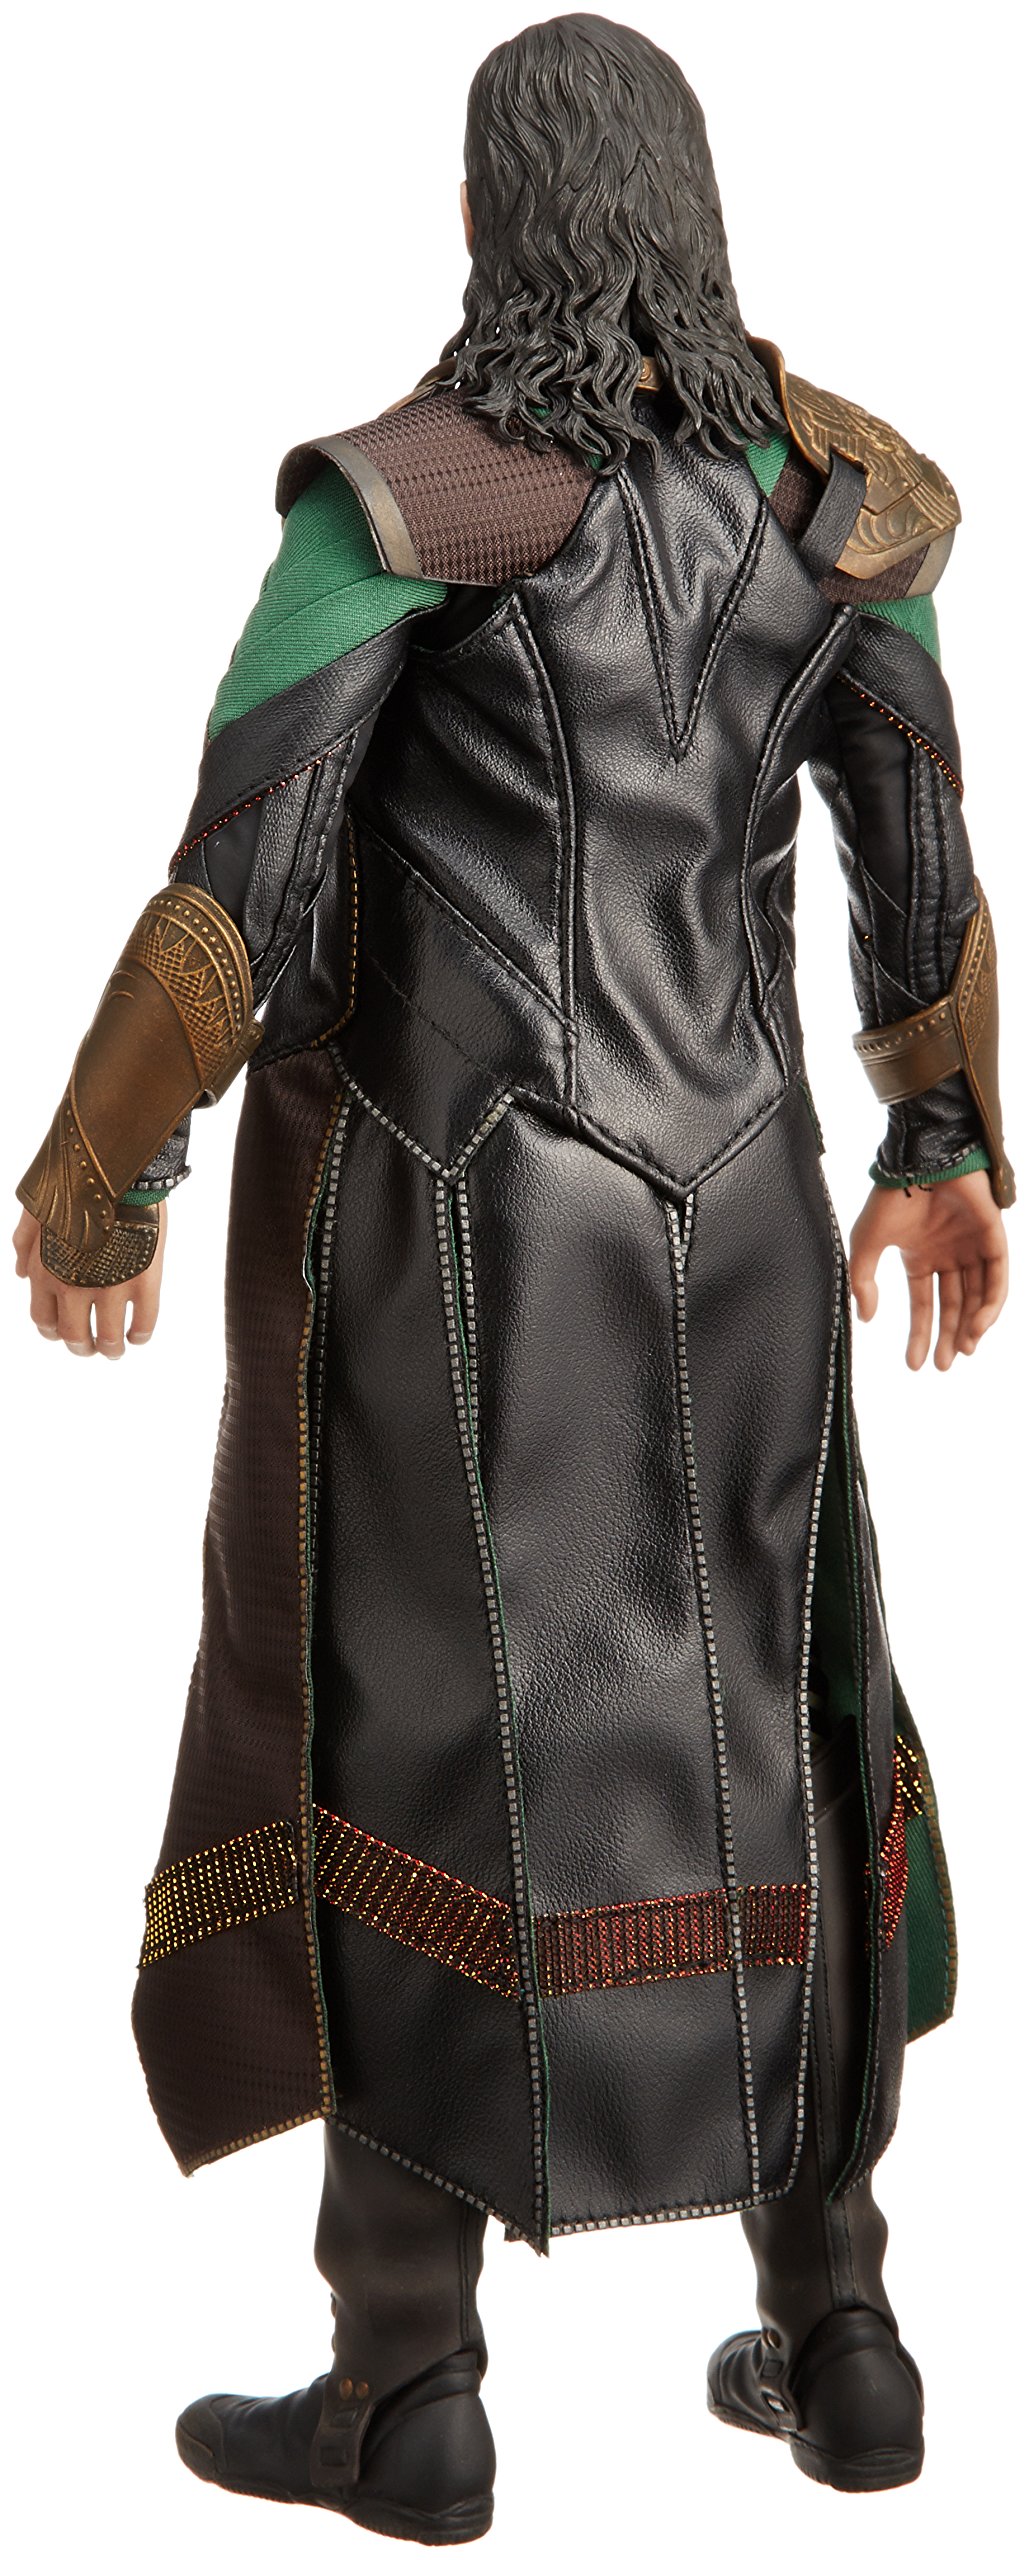 Hot Toys Thor The Dark World Loki 1/6th scale Action Figure for sale online 